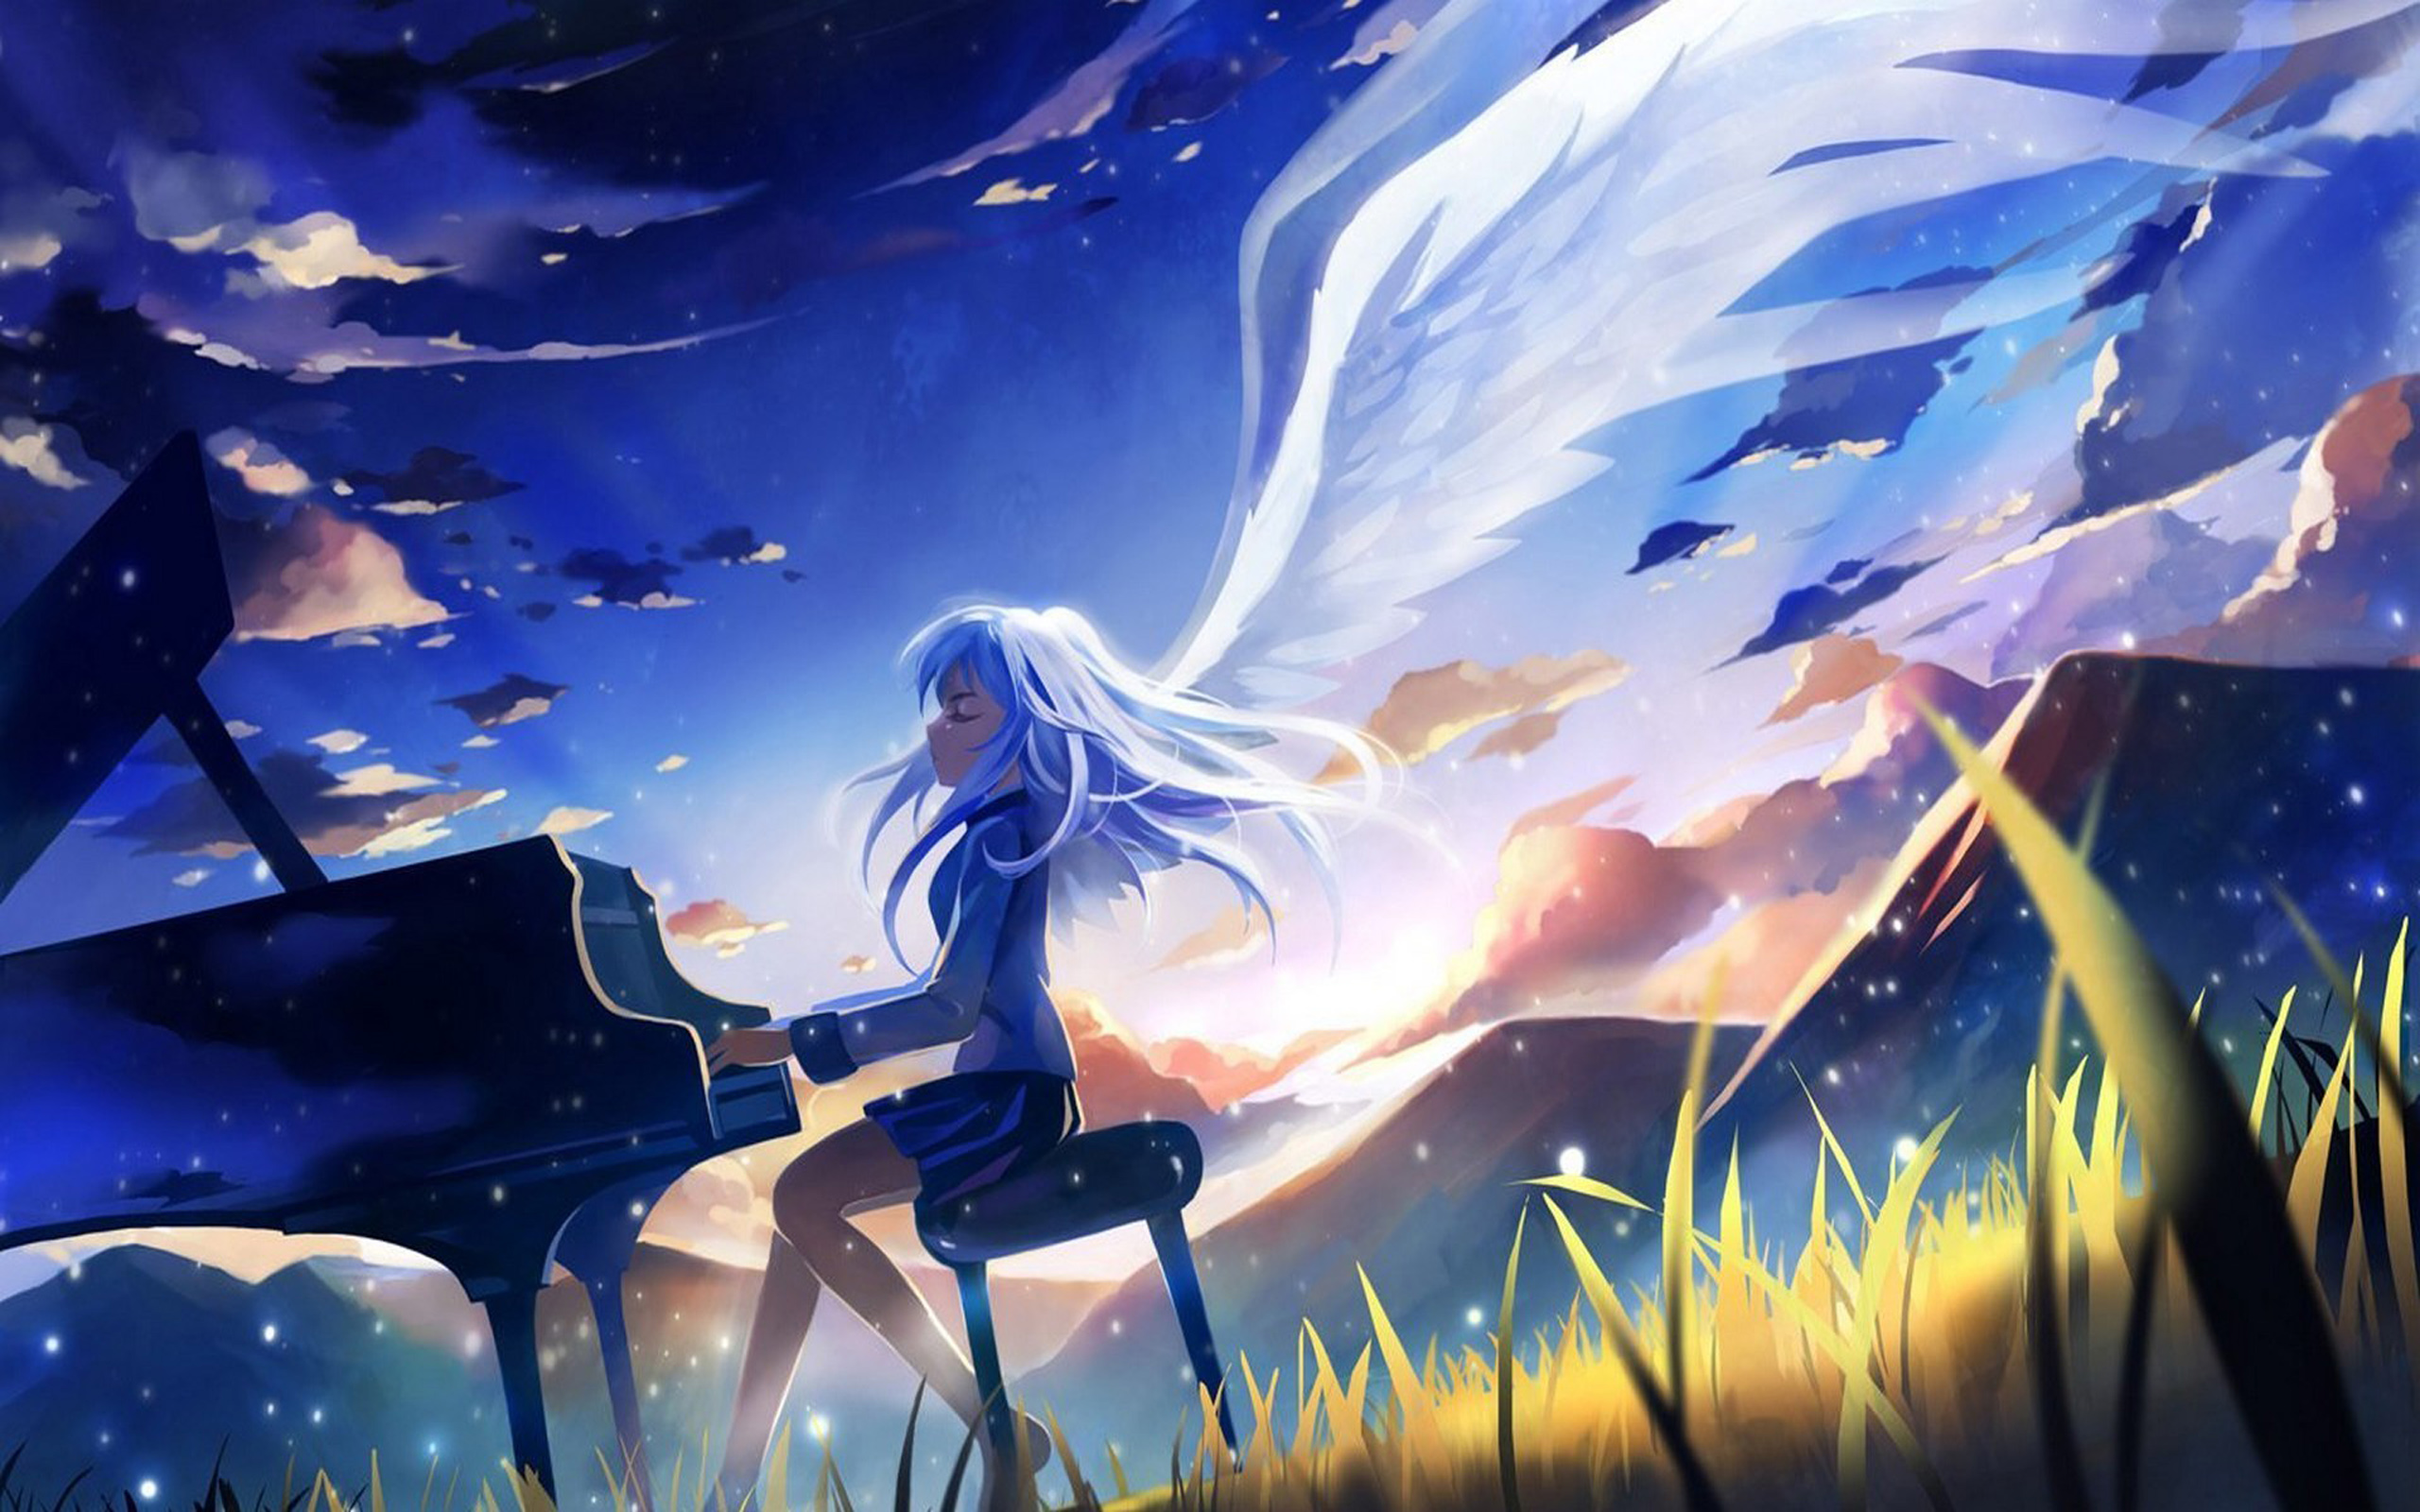 Anime Angel Girl Live Wallpaper Free Android Live Wallpaper download   Download the Free Anime Angel Girl Live Wallpaper Live Wallpaper to your  Android phone or tablet